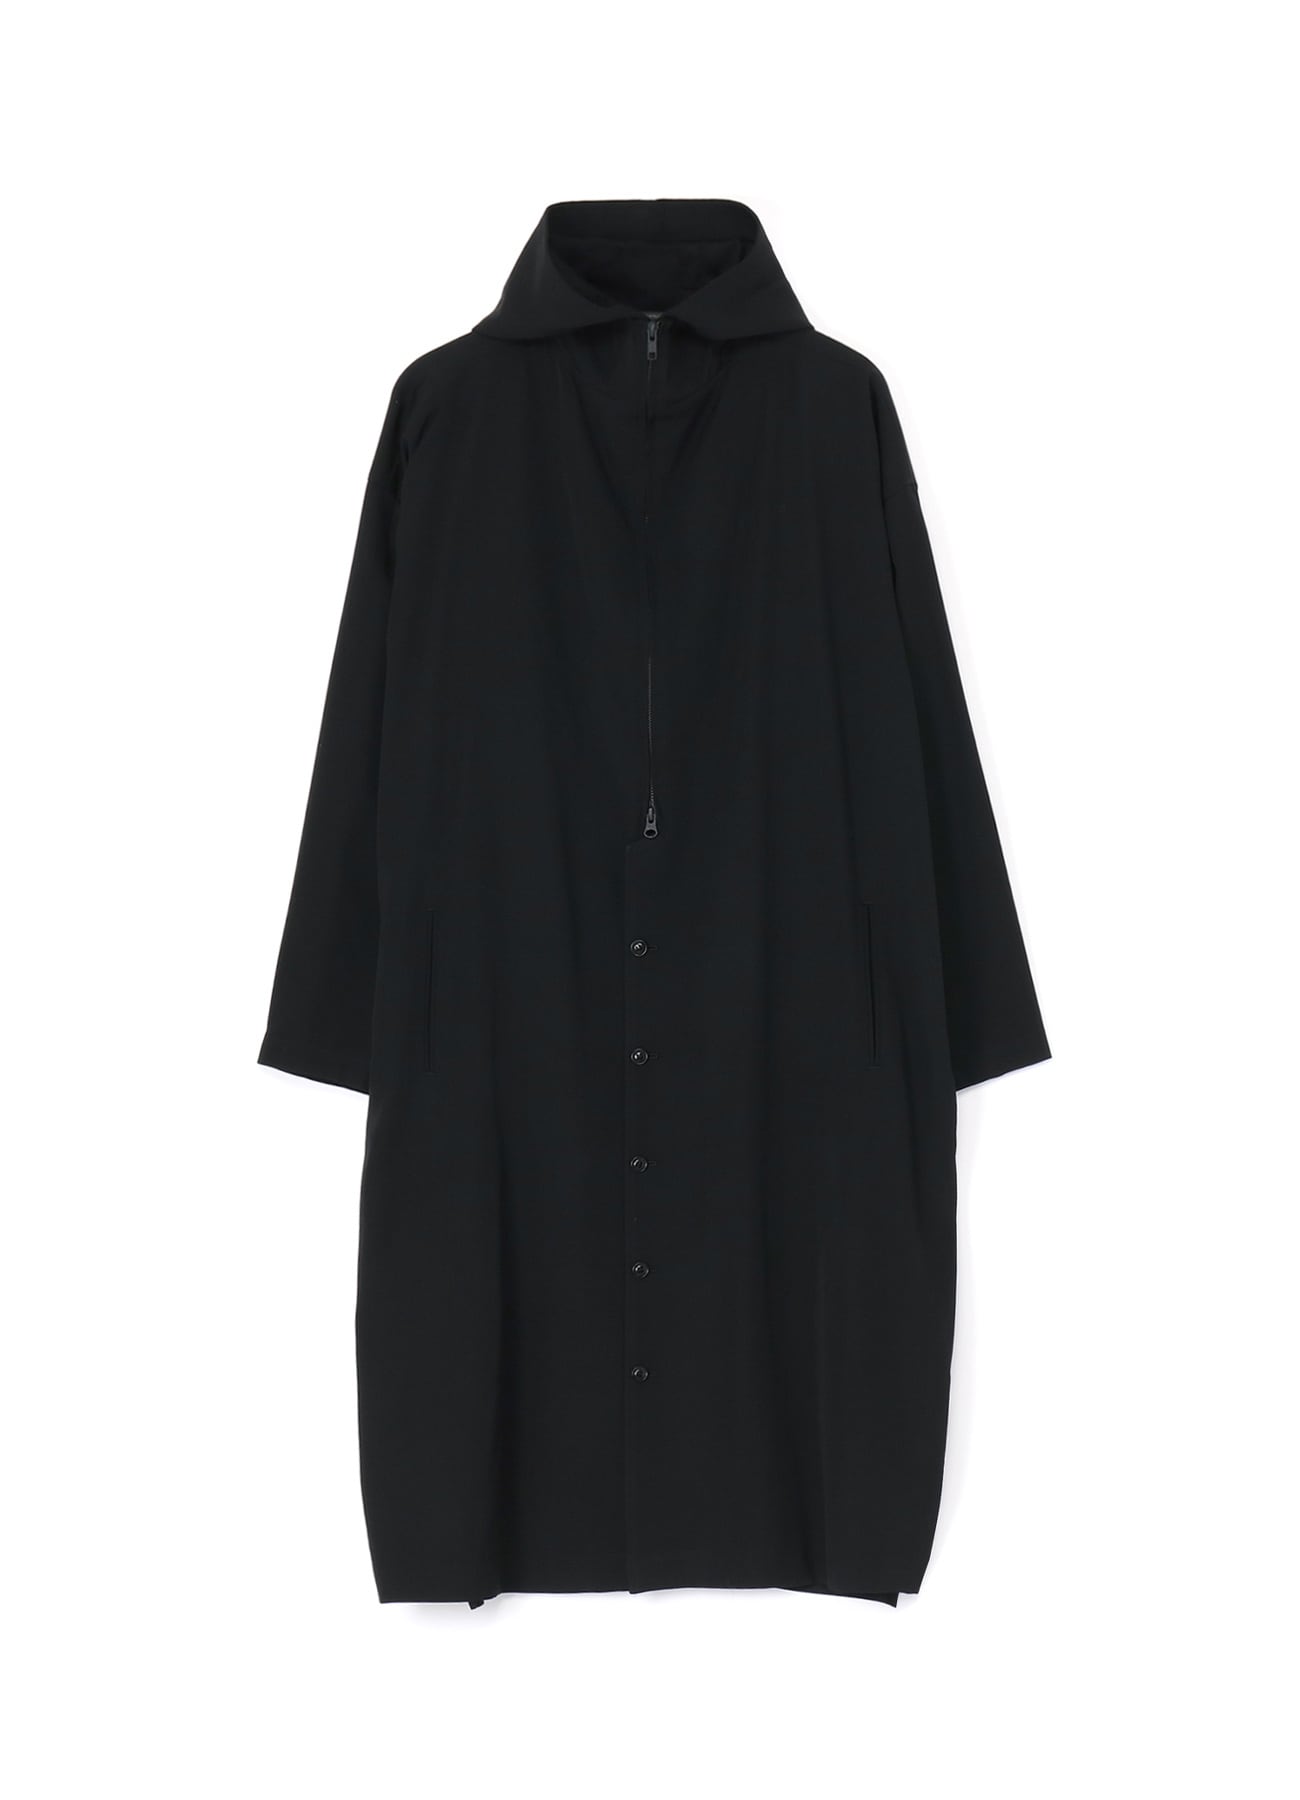 New Arrival | [Official] THE SHOP YOHJI YAMAMOTO (2/16 page)